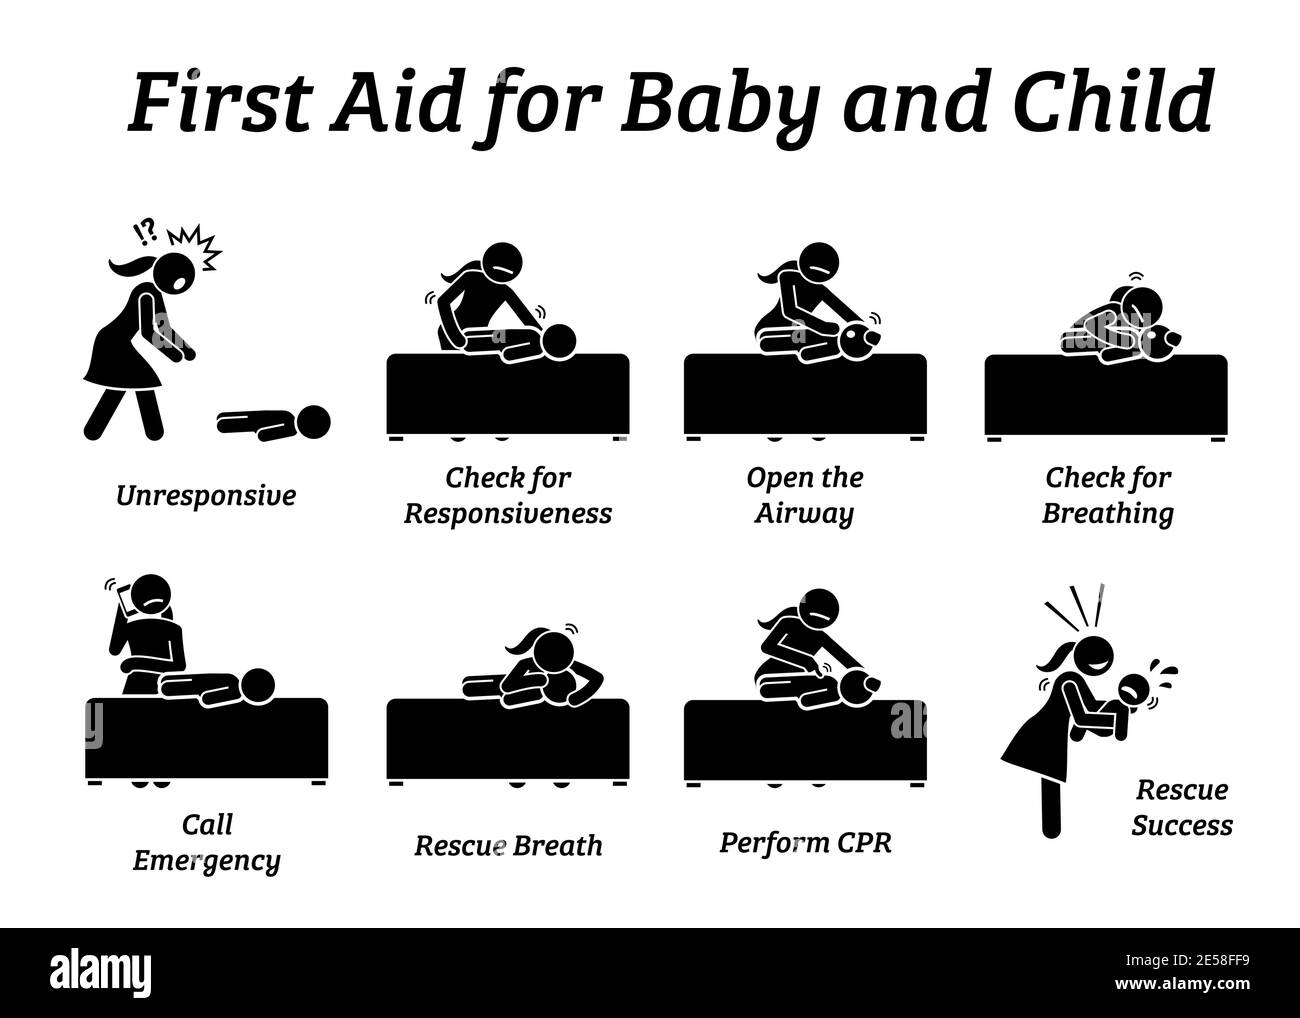 First aid rescue emergency treatment for baby, infant, or child stick figures icons. Vector illustrations of CPR rescue procedures and how to help and Stock Vector